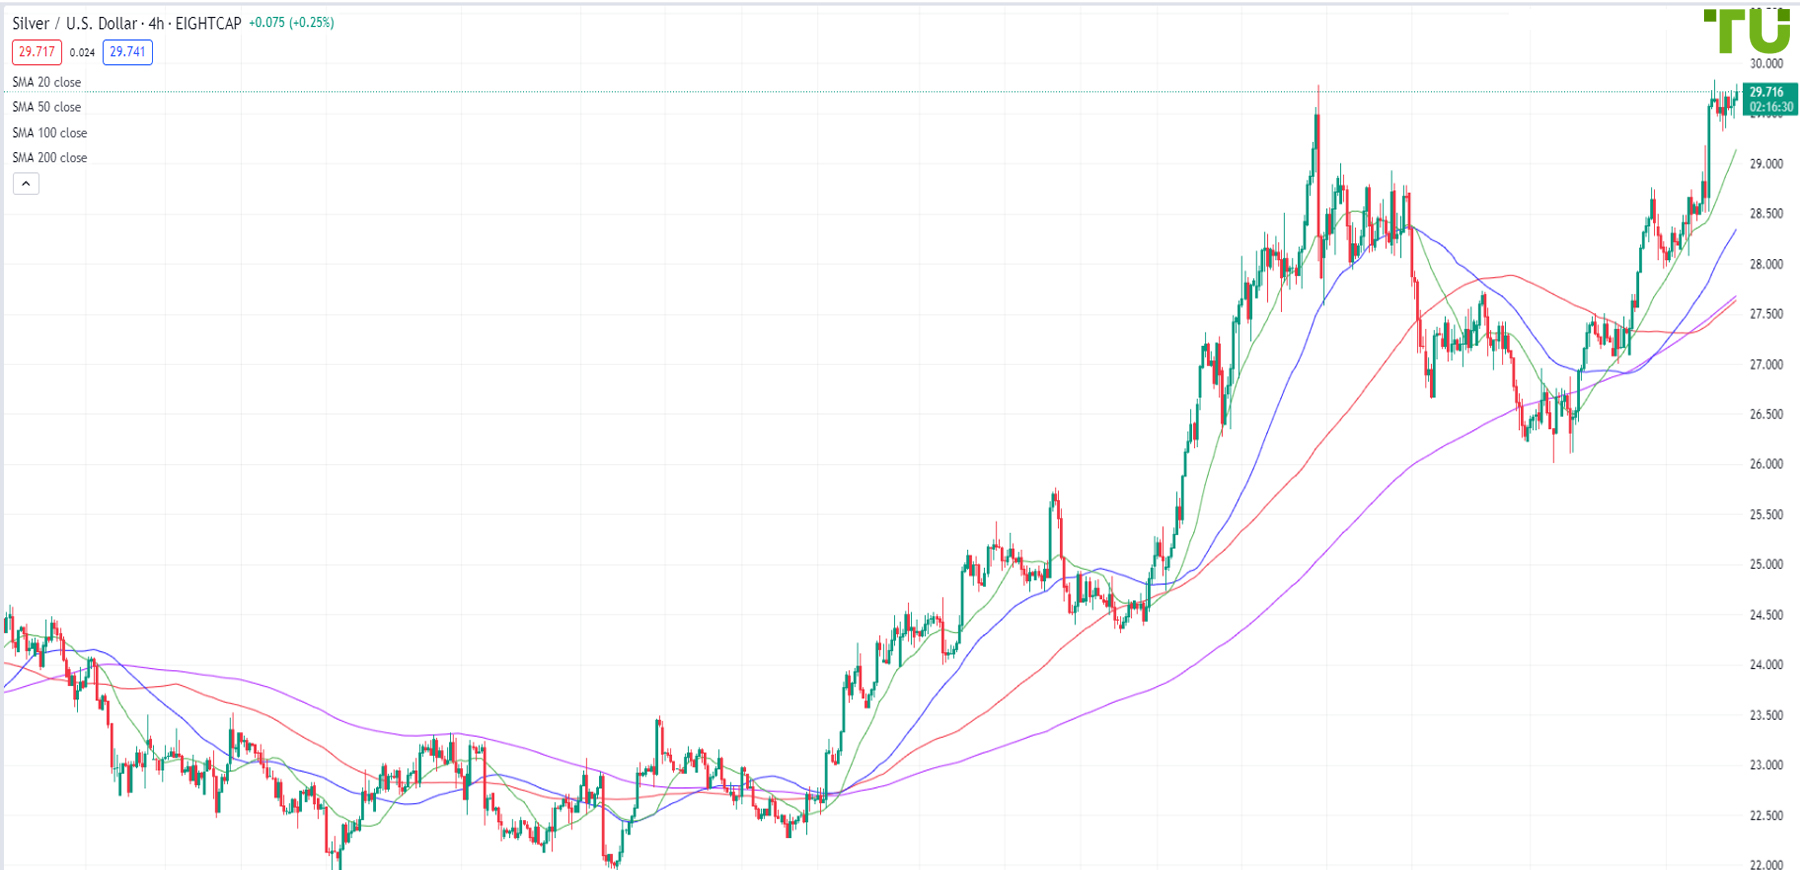 XAG/USD attempts to break resistance at .80 per ounce